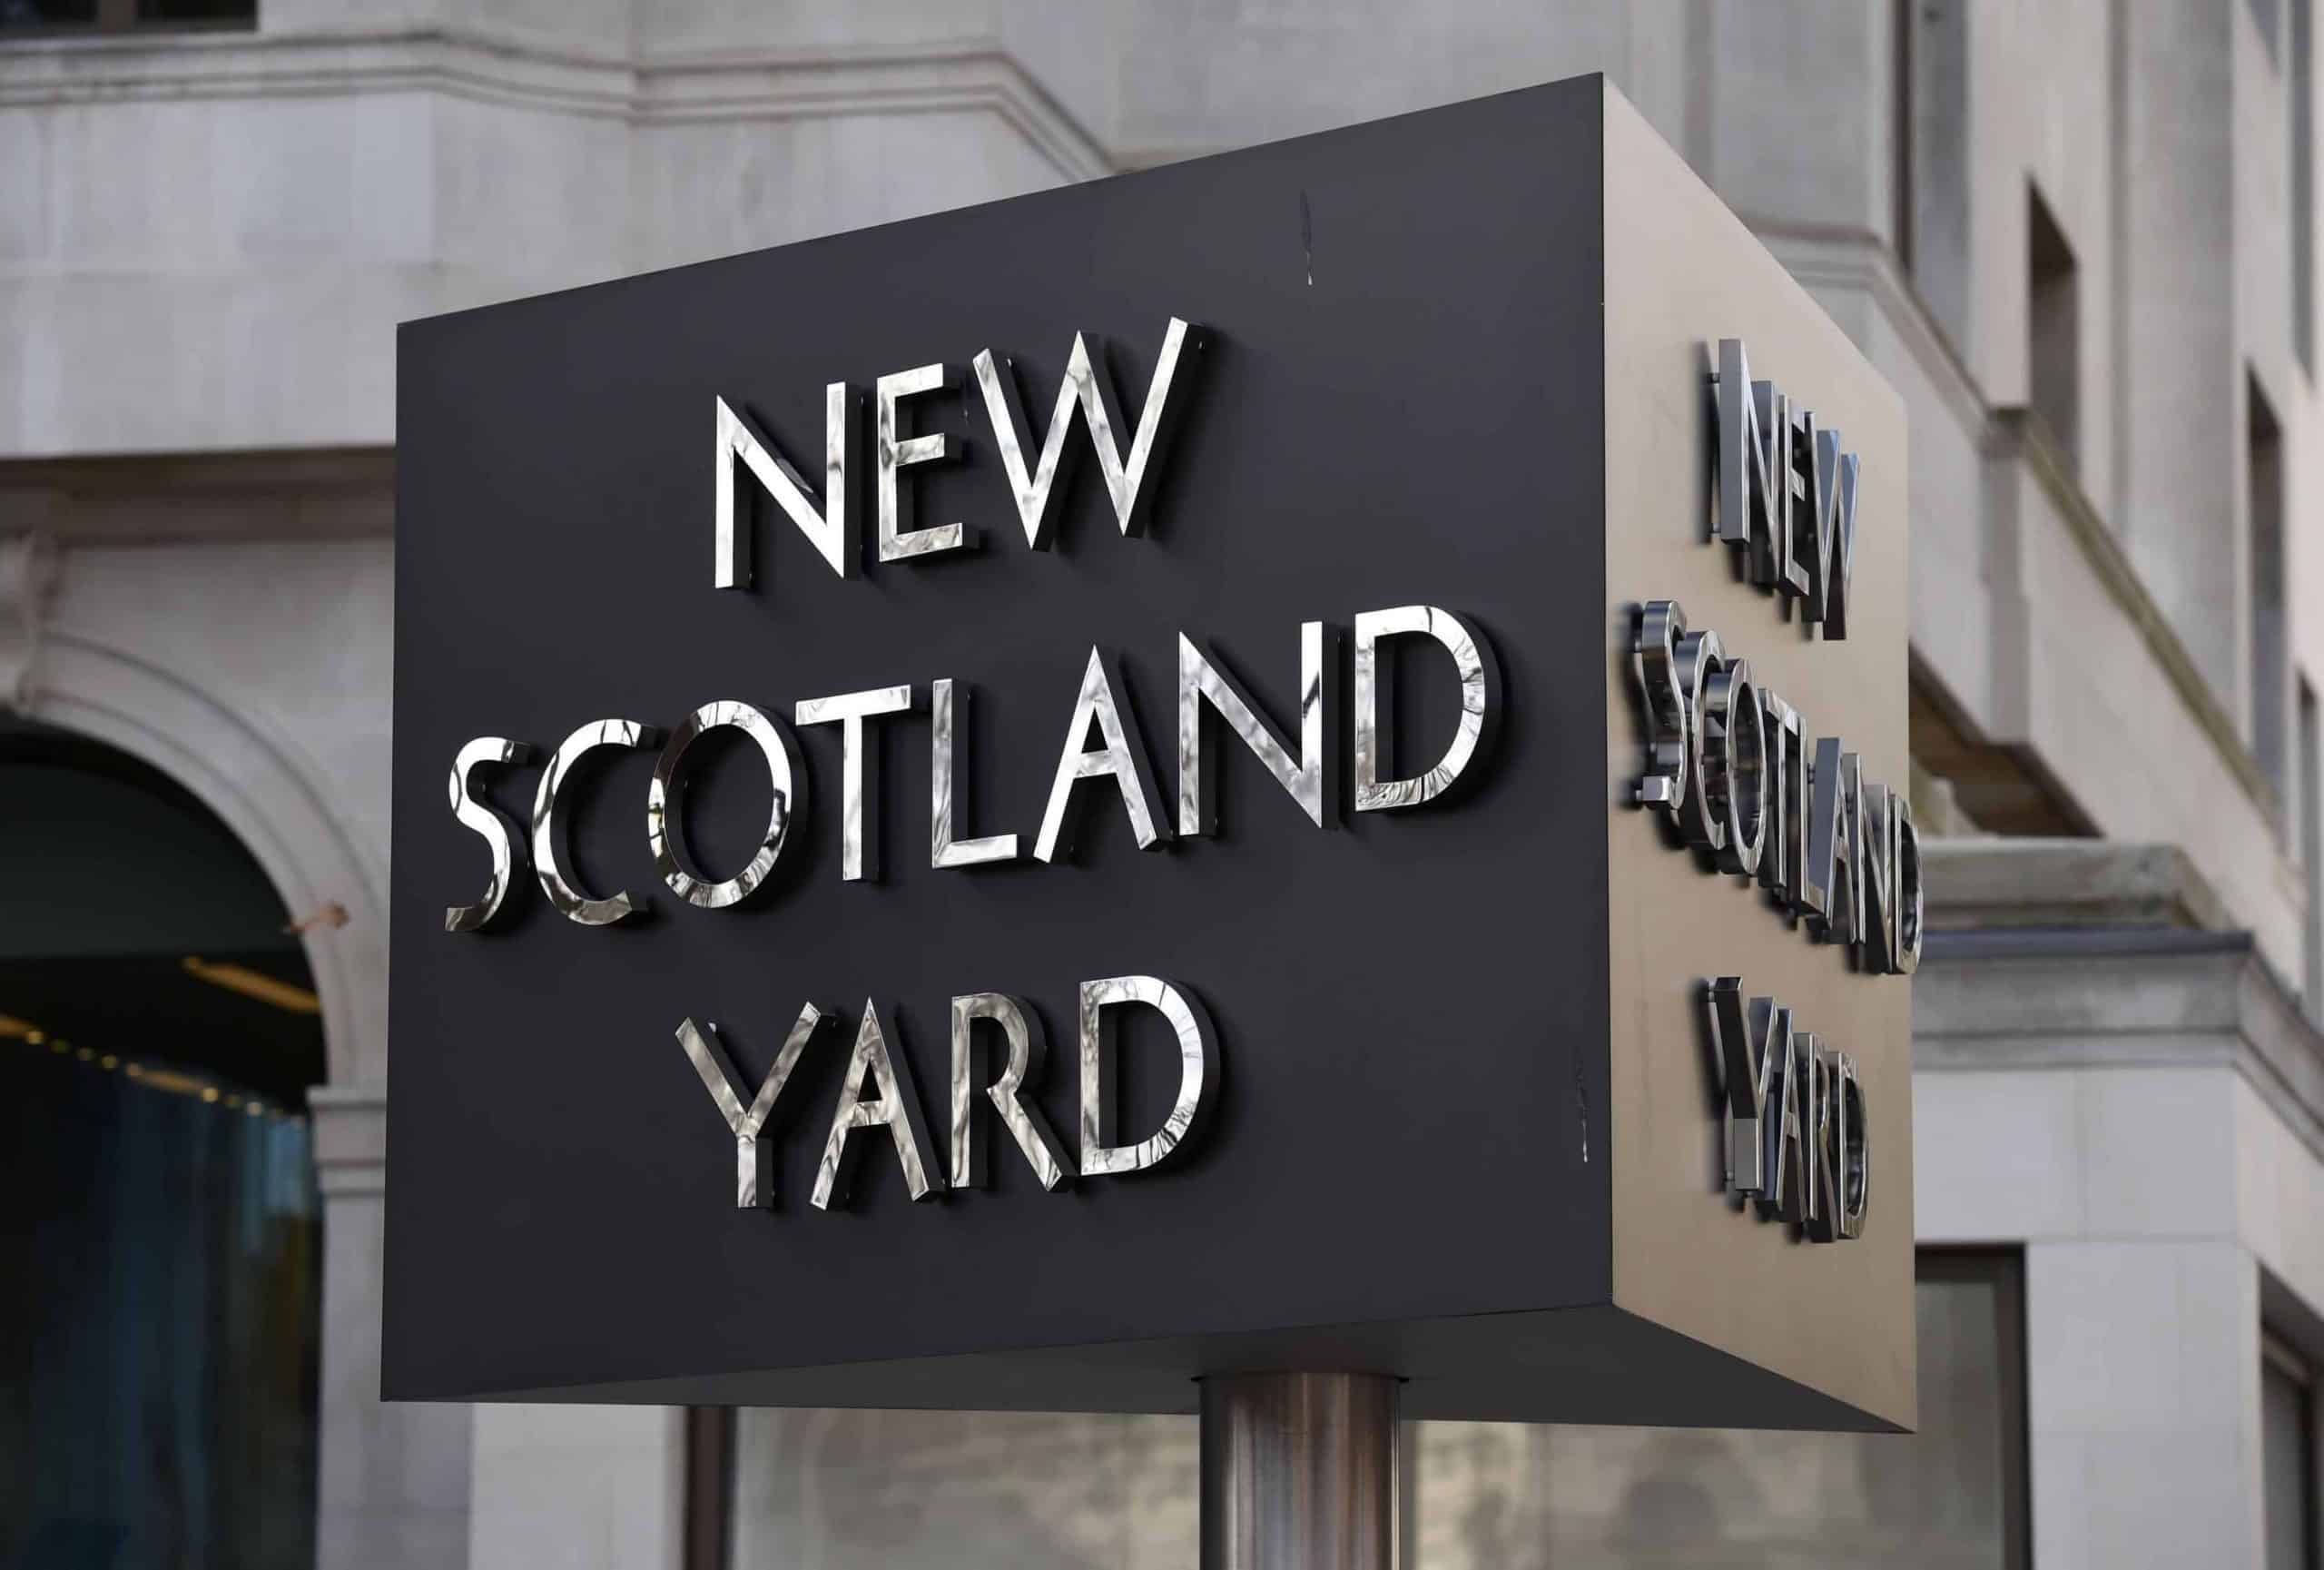 Serving Met Police officer pleads guilty to child sexual offences